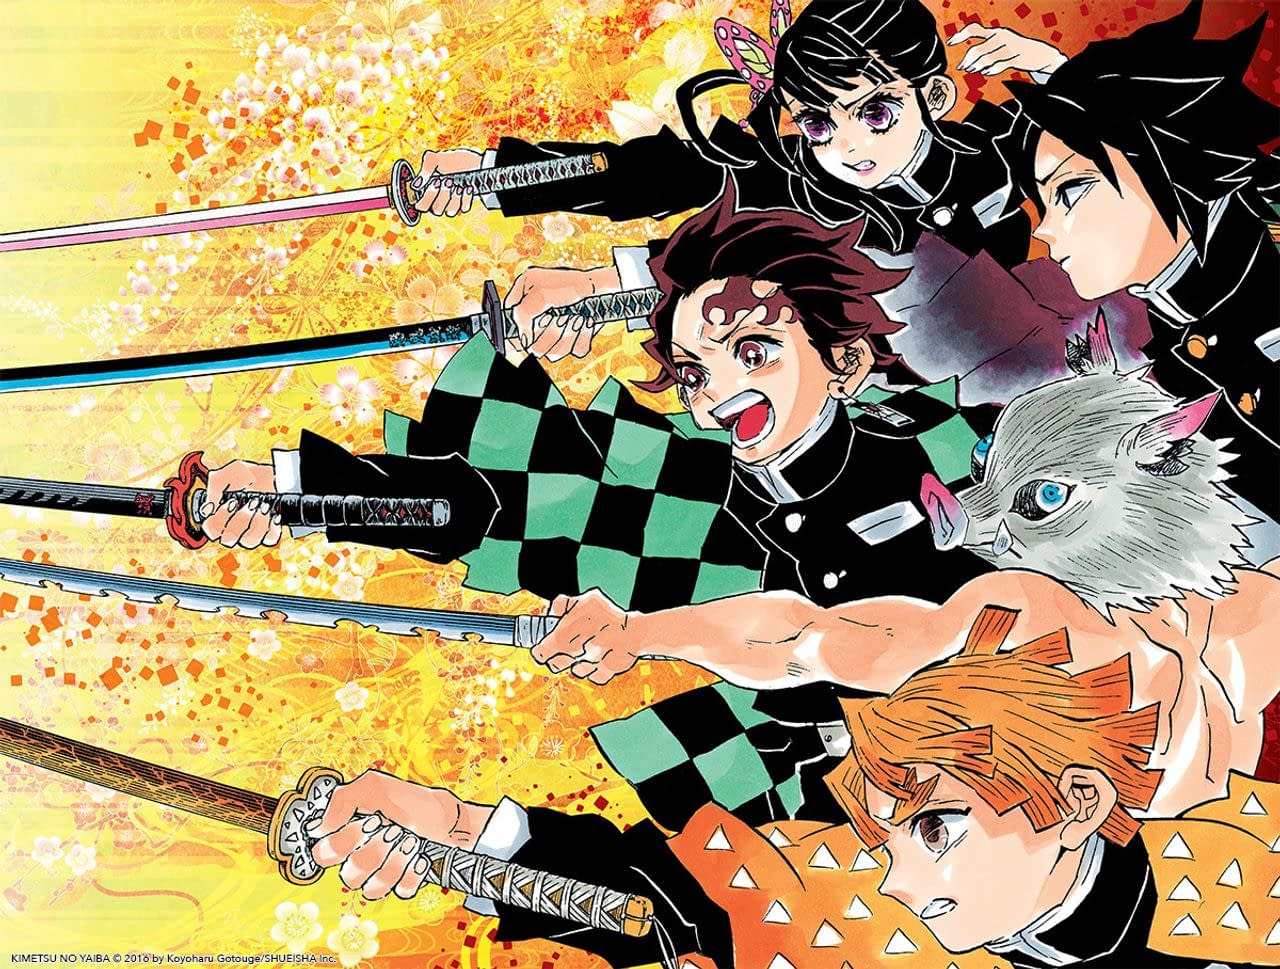 Demon Slayer's Manga One-Shot Will Be Available Online